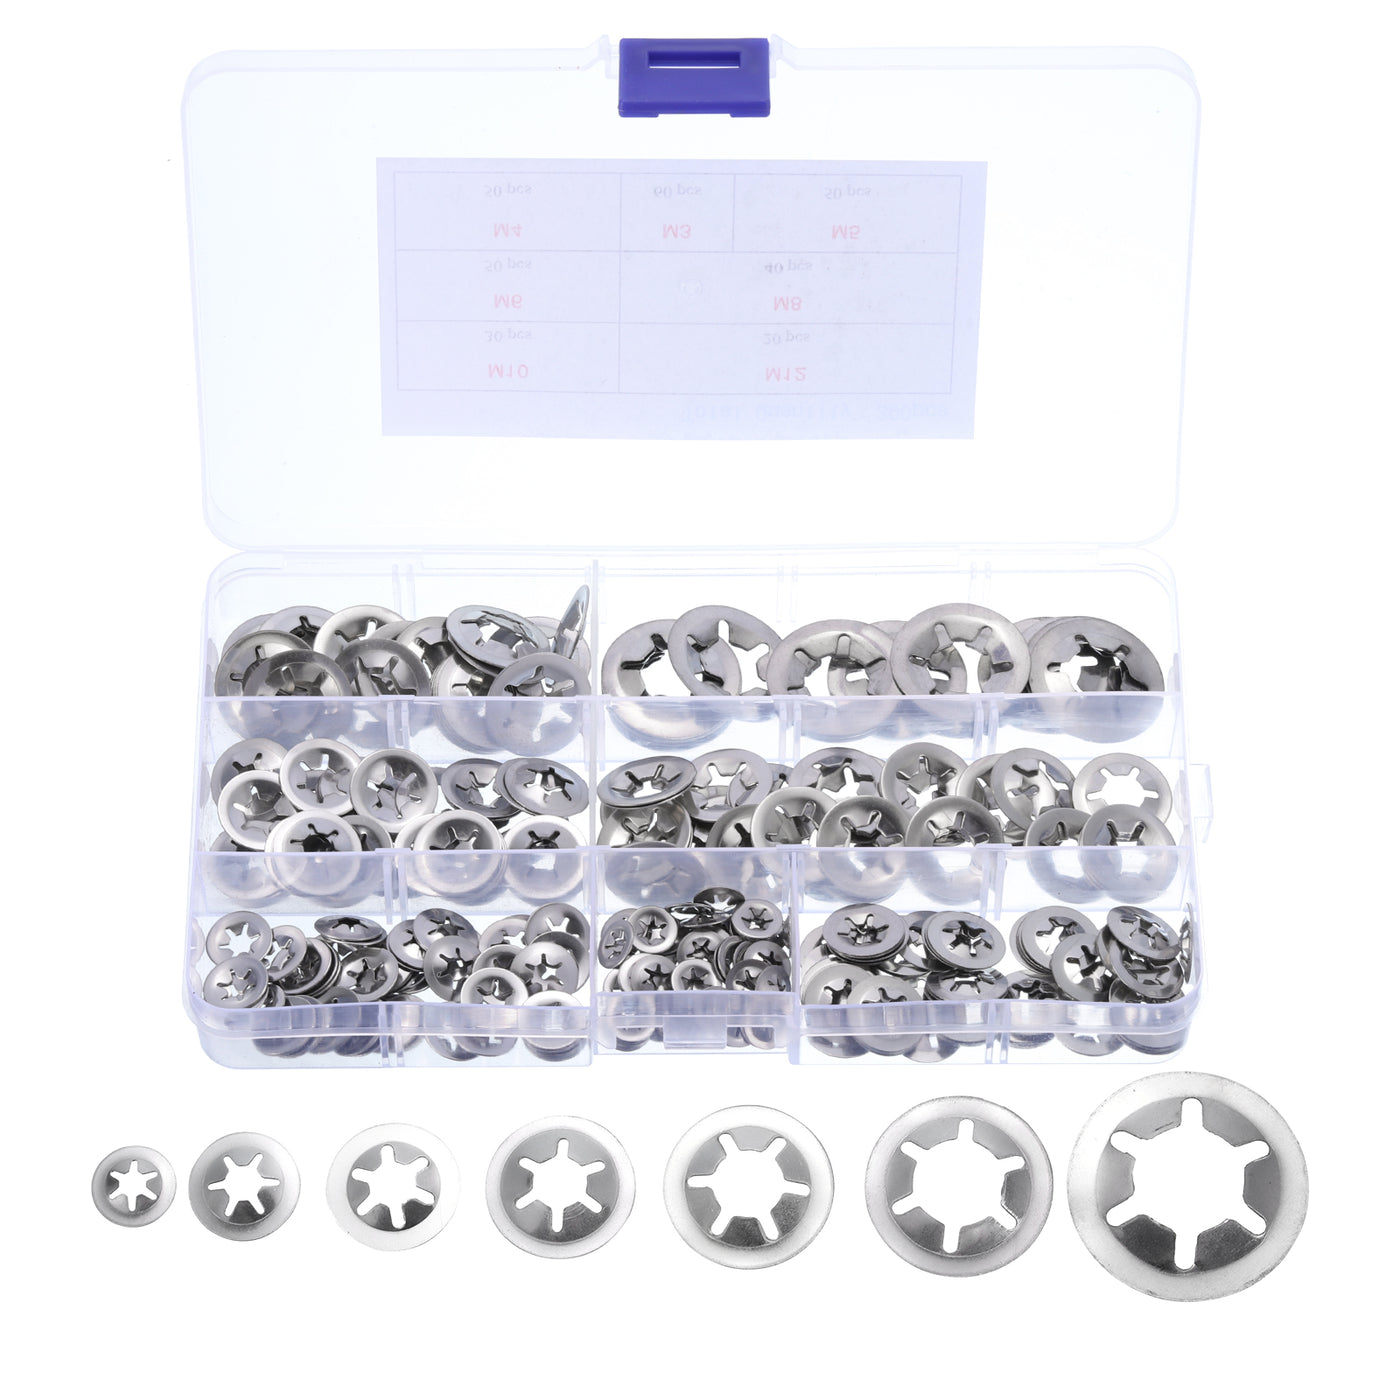 uxcell Uxcell 300pcs Internal Tooth Star Lock Washers M3 M4 M5 M6 M8 M10 M12, Stainless Steel